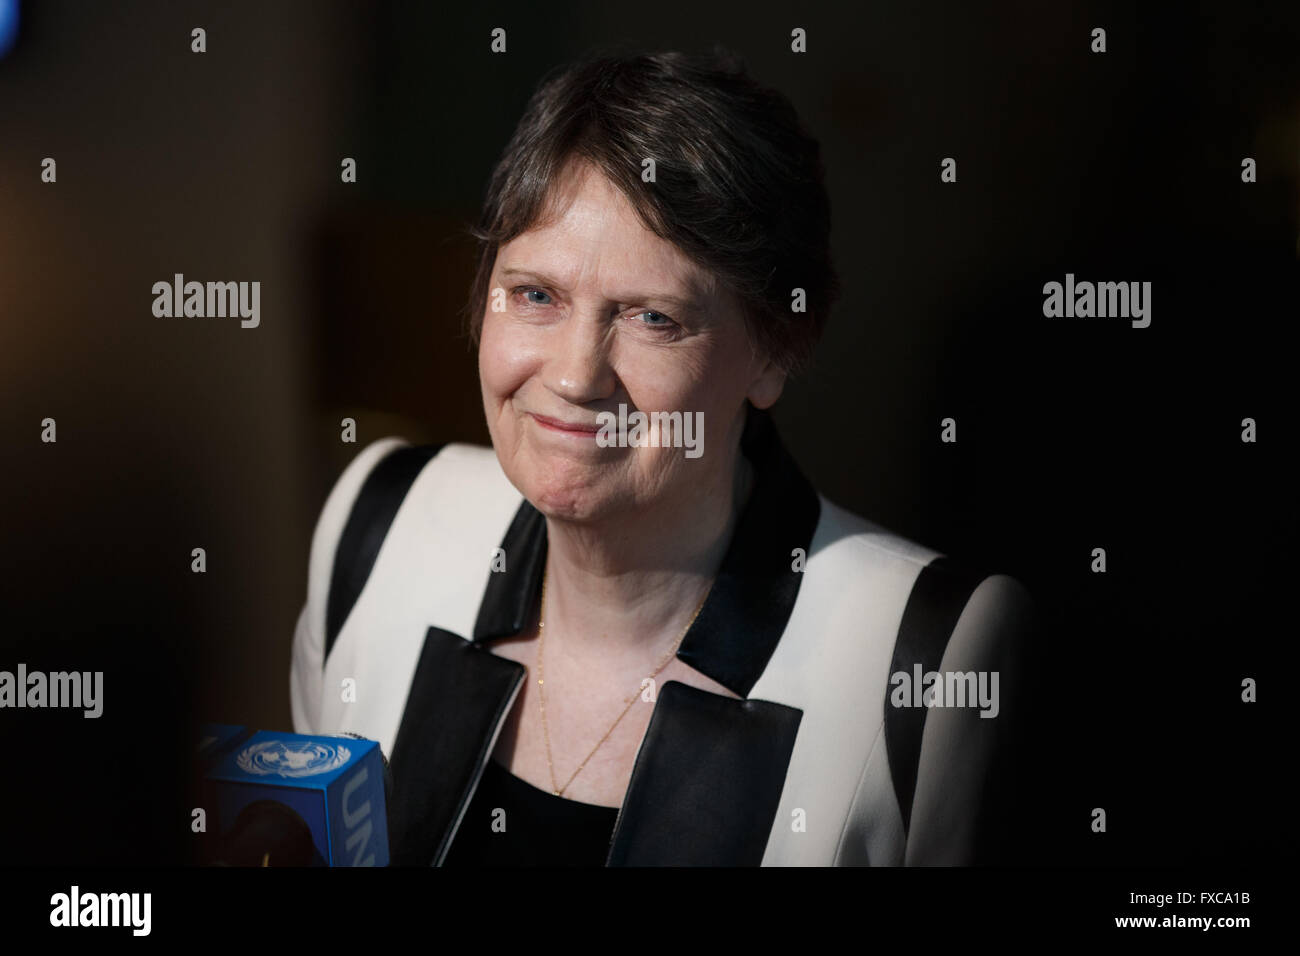 New York, United Nations headquarters in New York. 14th Apr, 2016. Helen Clark, former Prime Minister of New Zealand and Administrator of the United Nations Development Programme (UNDP), candidate for the position of the next secretary-general, addresses the press at the United Nations headquarters in New York, April 14, 2016. The UN General Assembly on Tuesday kicked off a three-day informal dialogue with candidates for the position of the next secretary-general. © Li Muzi/Xinhua/Alamy Live News Stock Photo